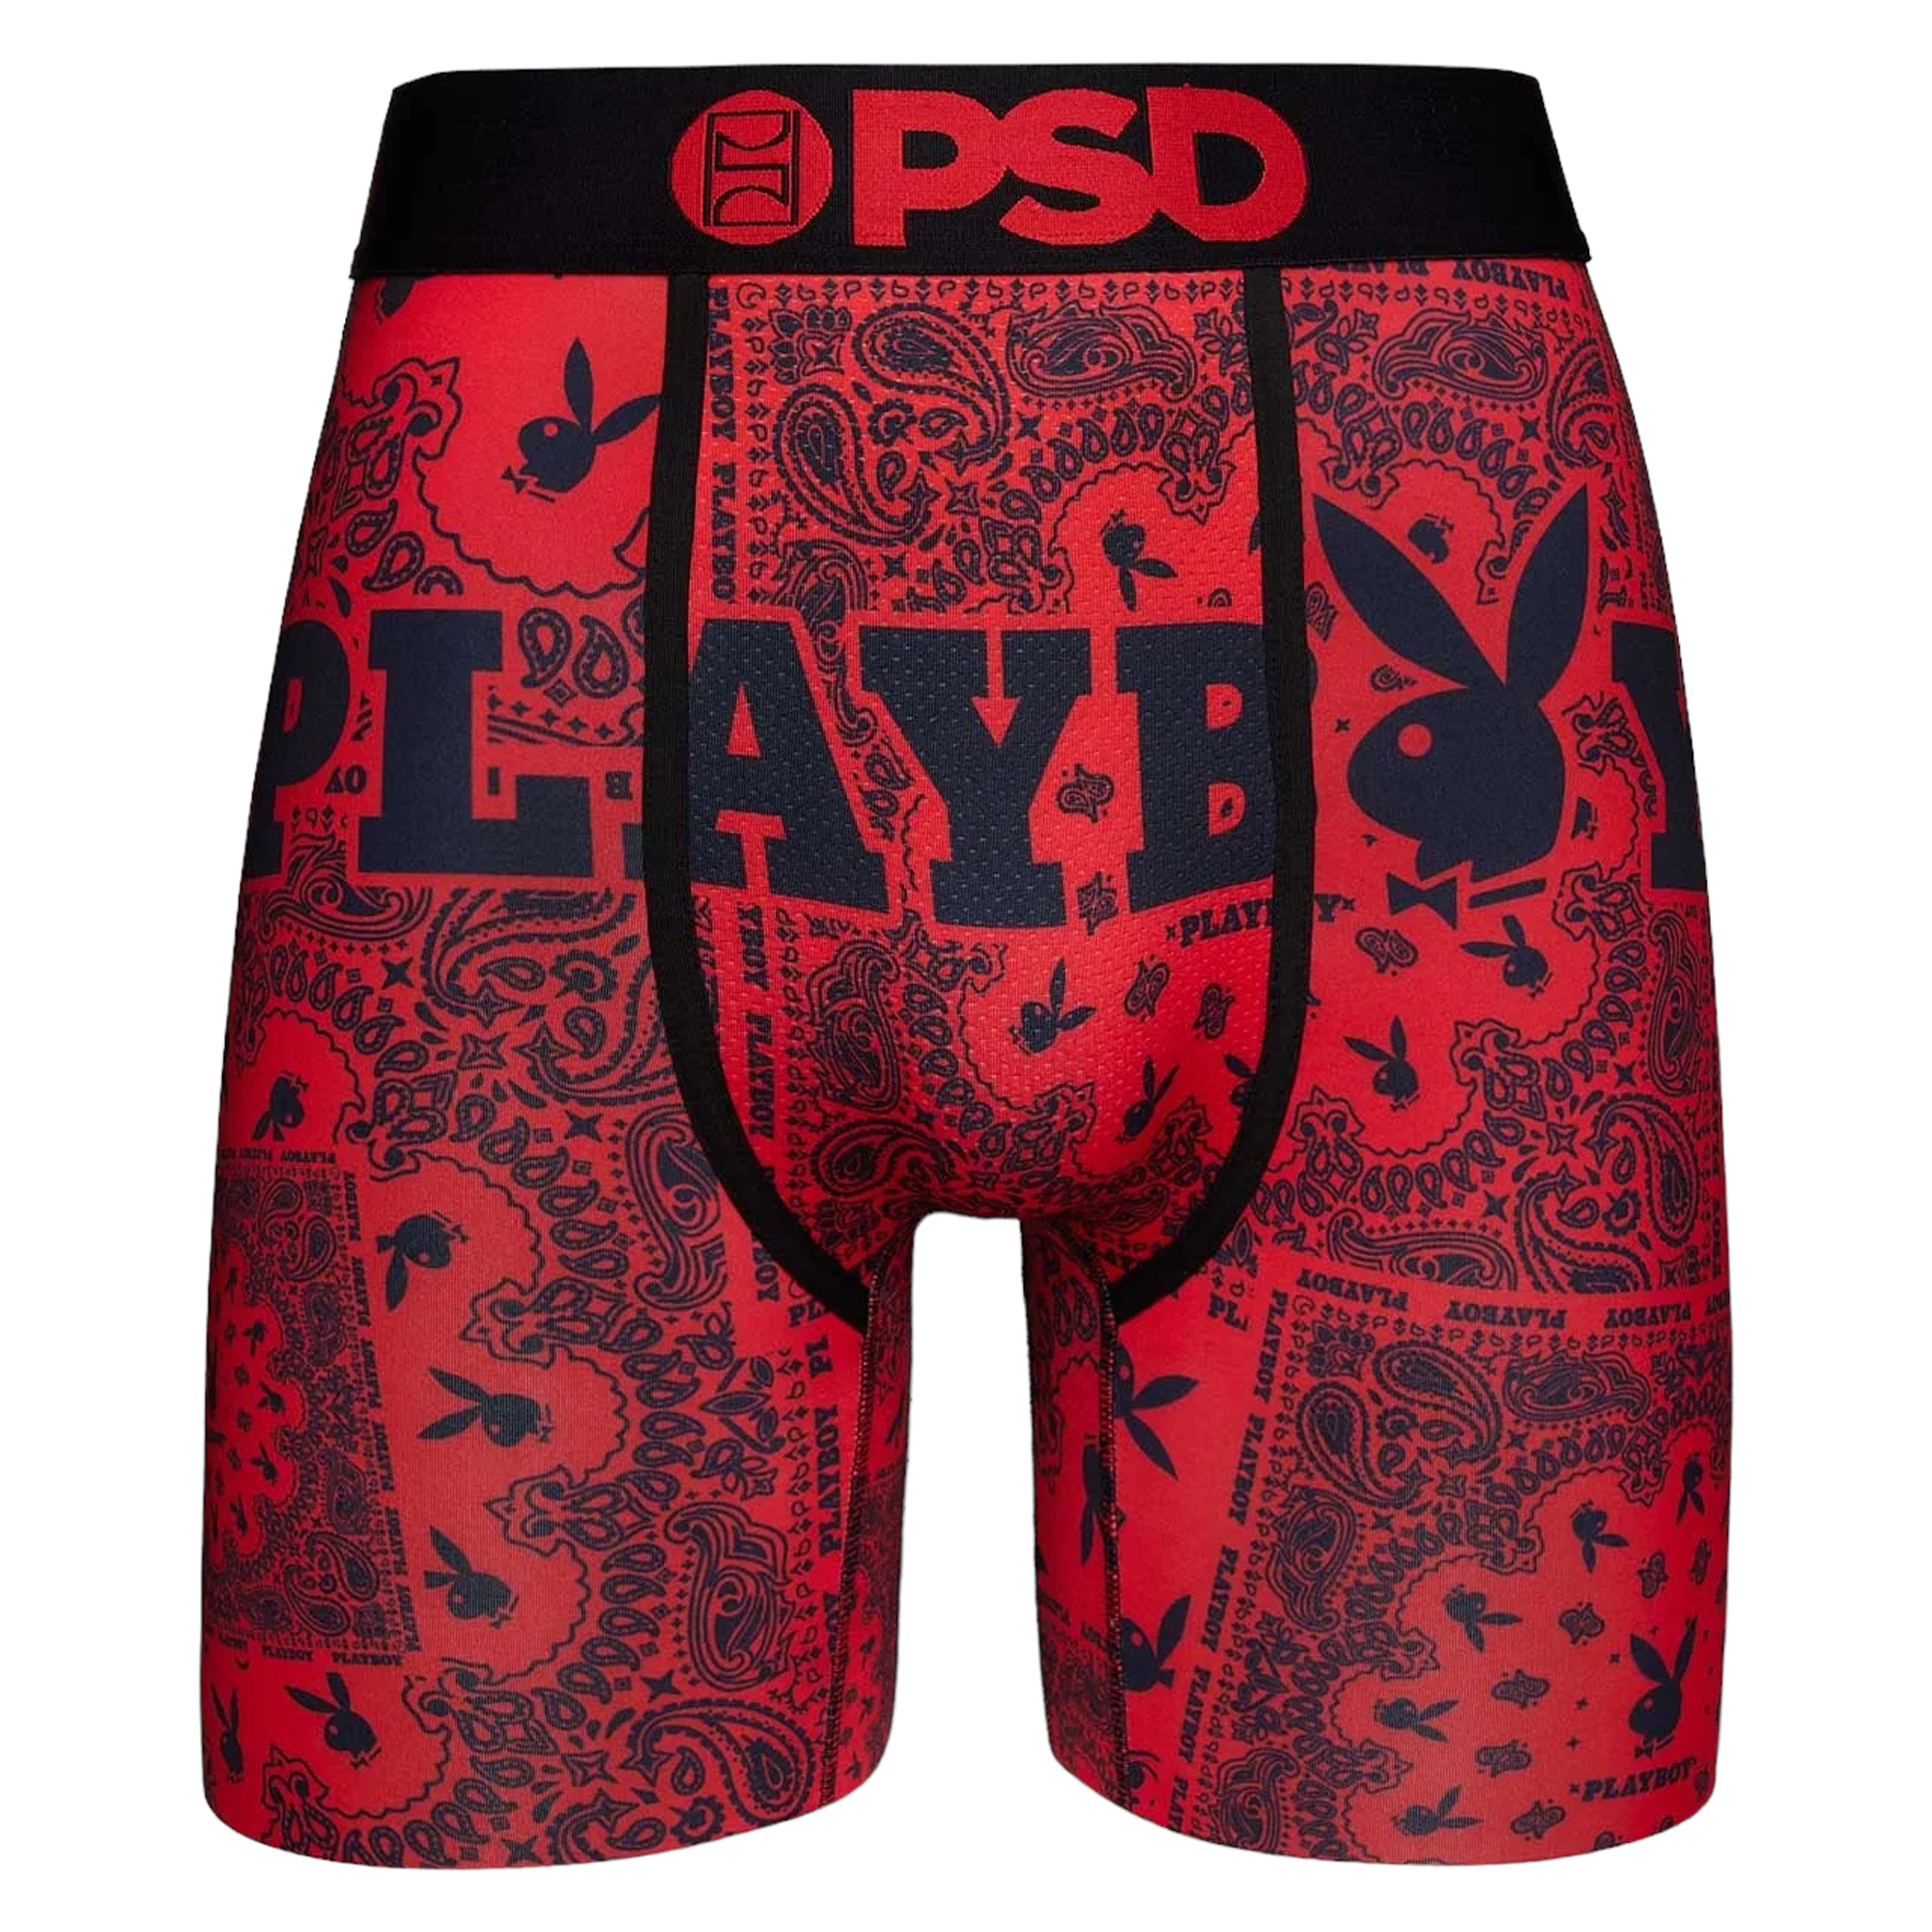 PSD Womens Playboy Paisely Sports Bra Red